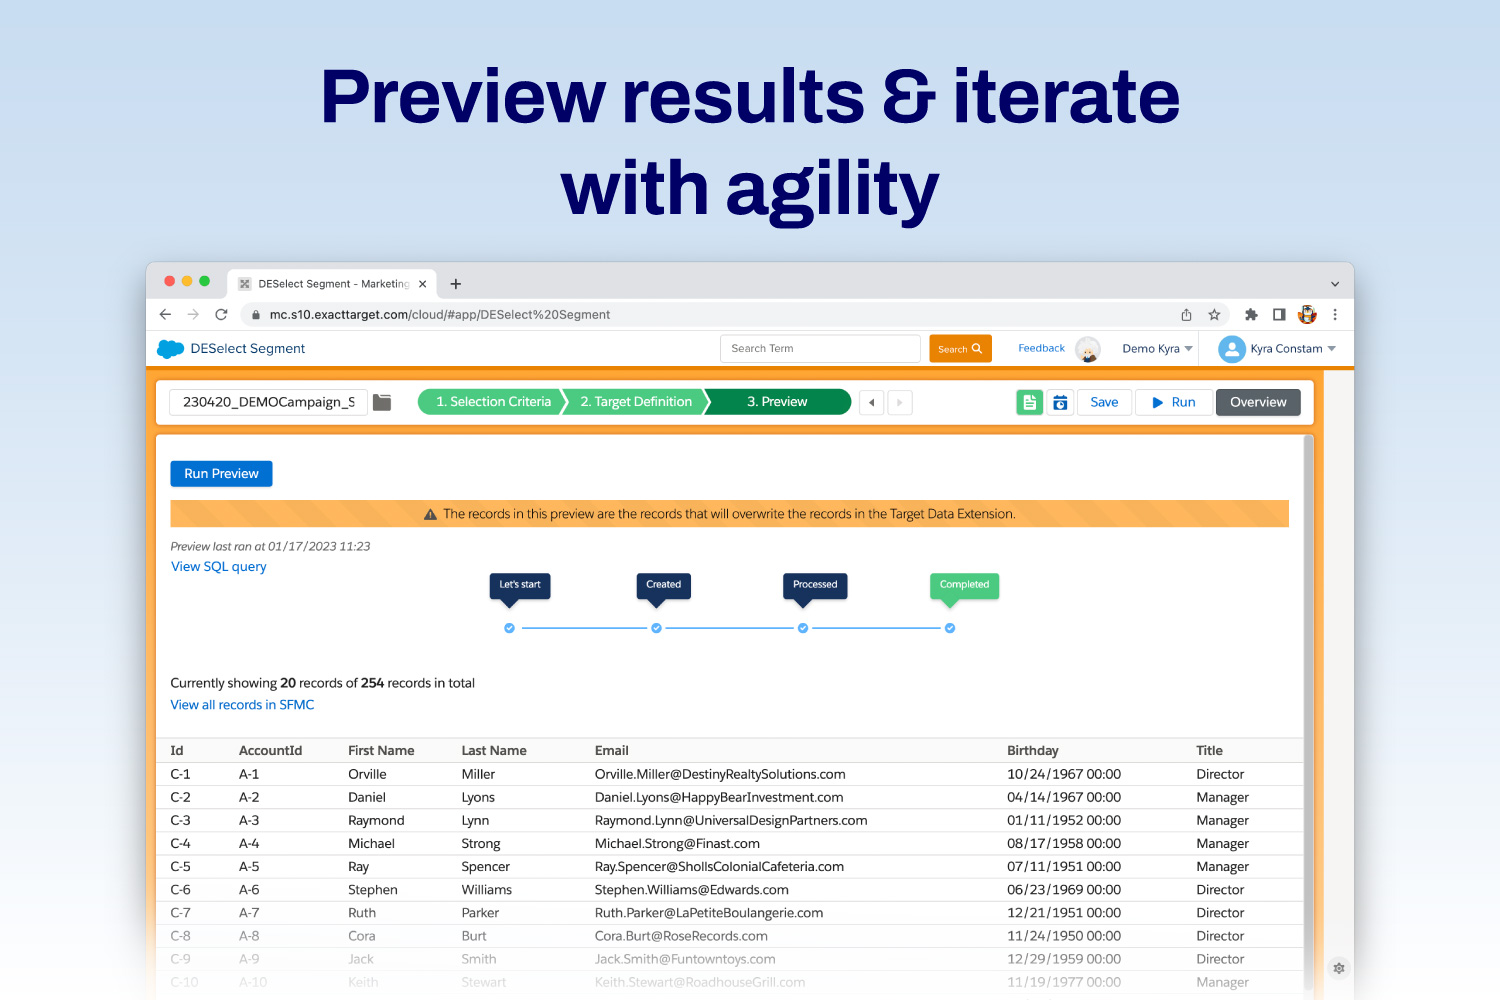 Preview results and iterate with agility